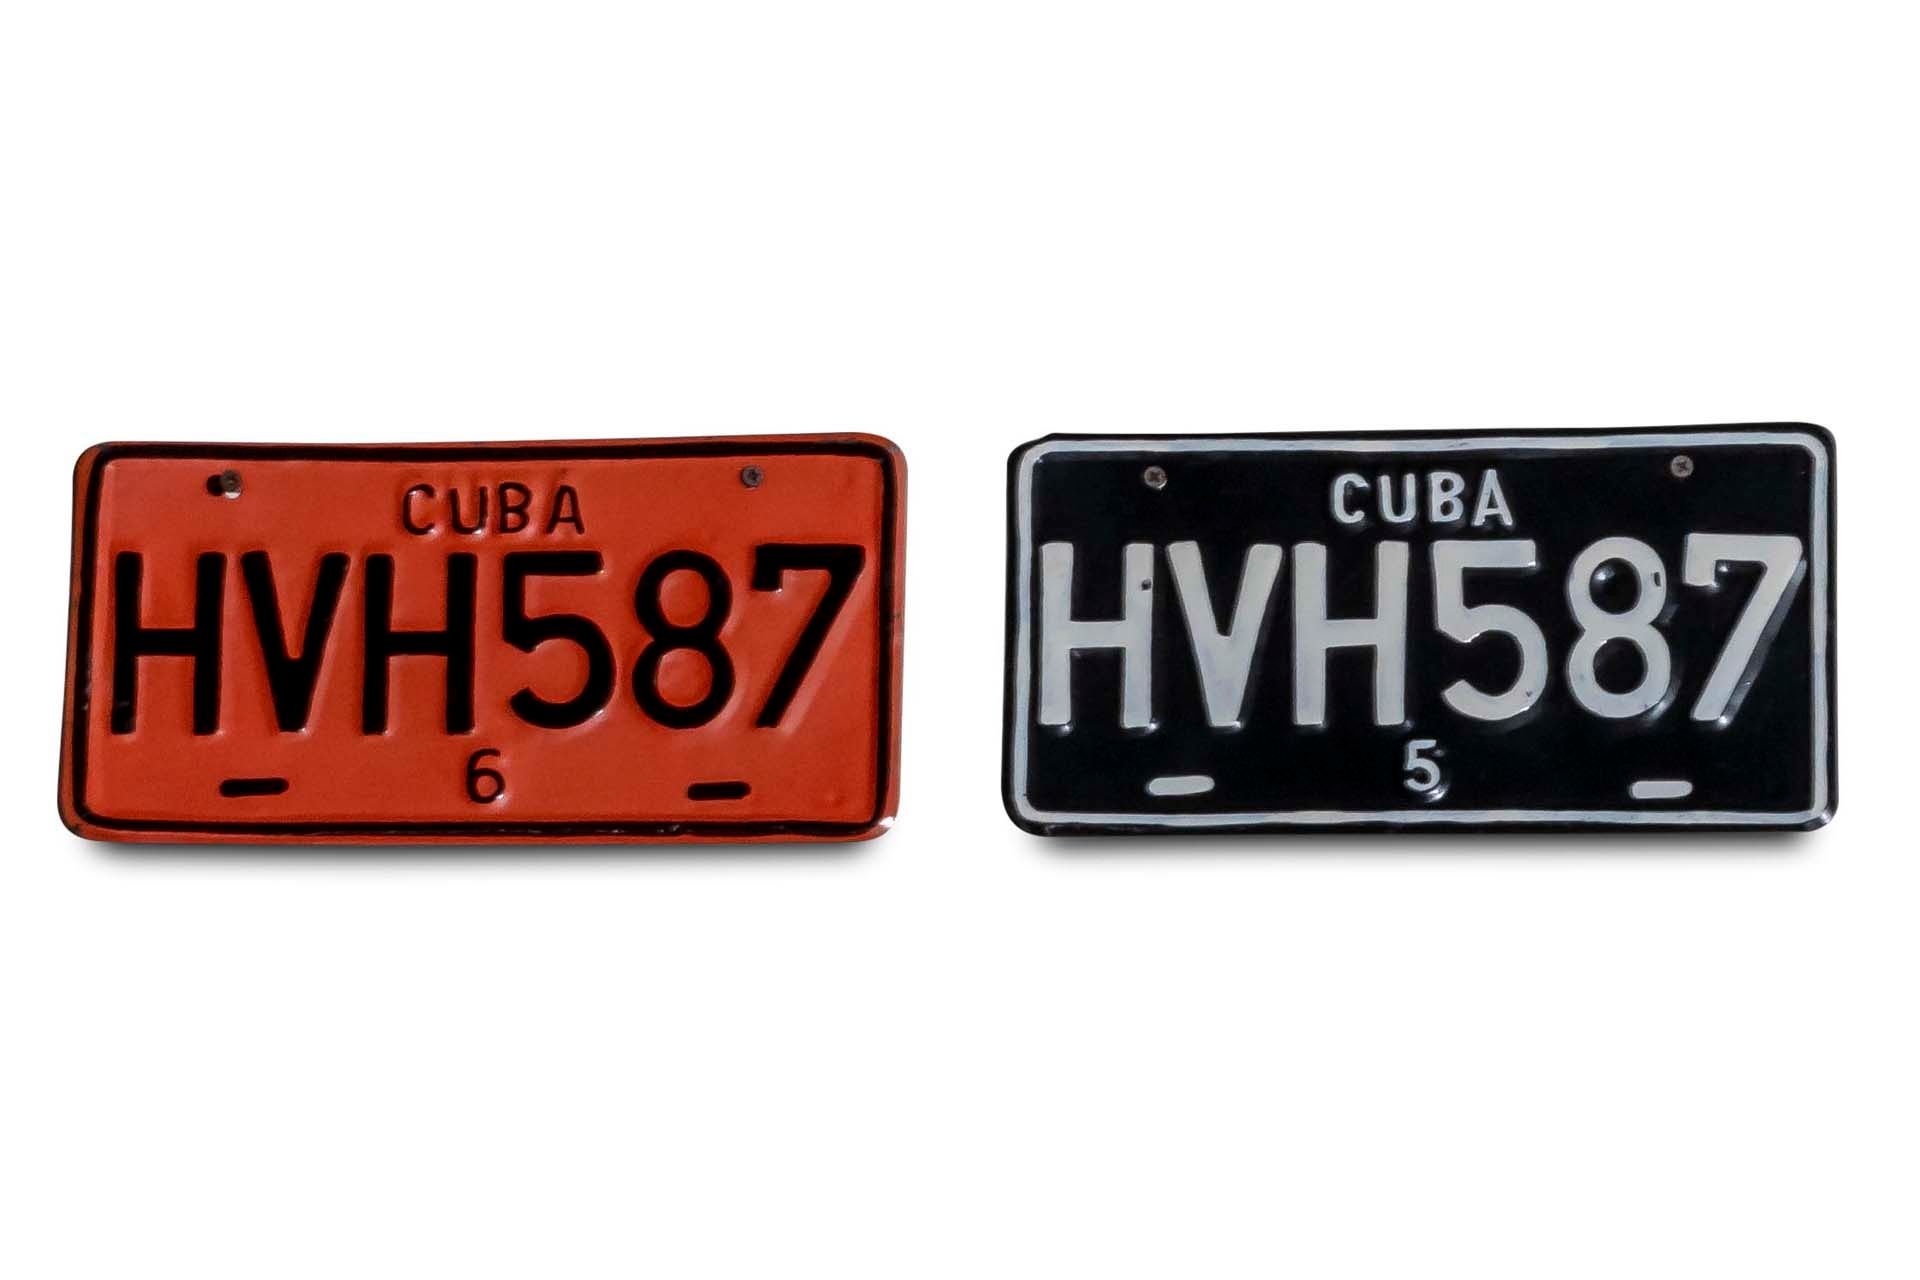 For Sale Pair of Matching Cuban License Plates